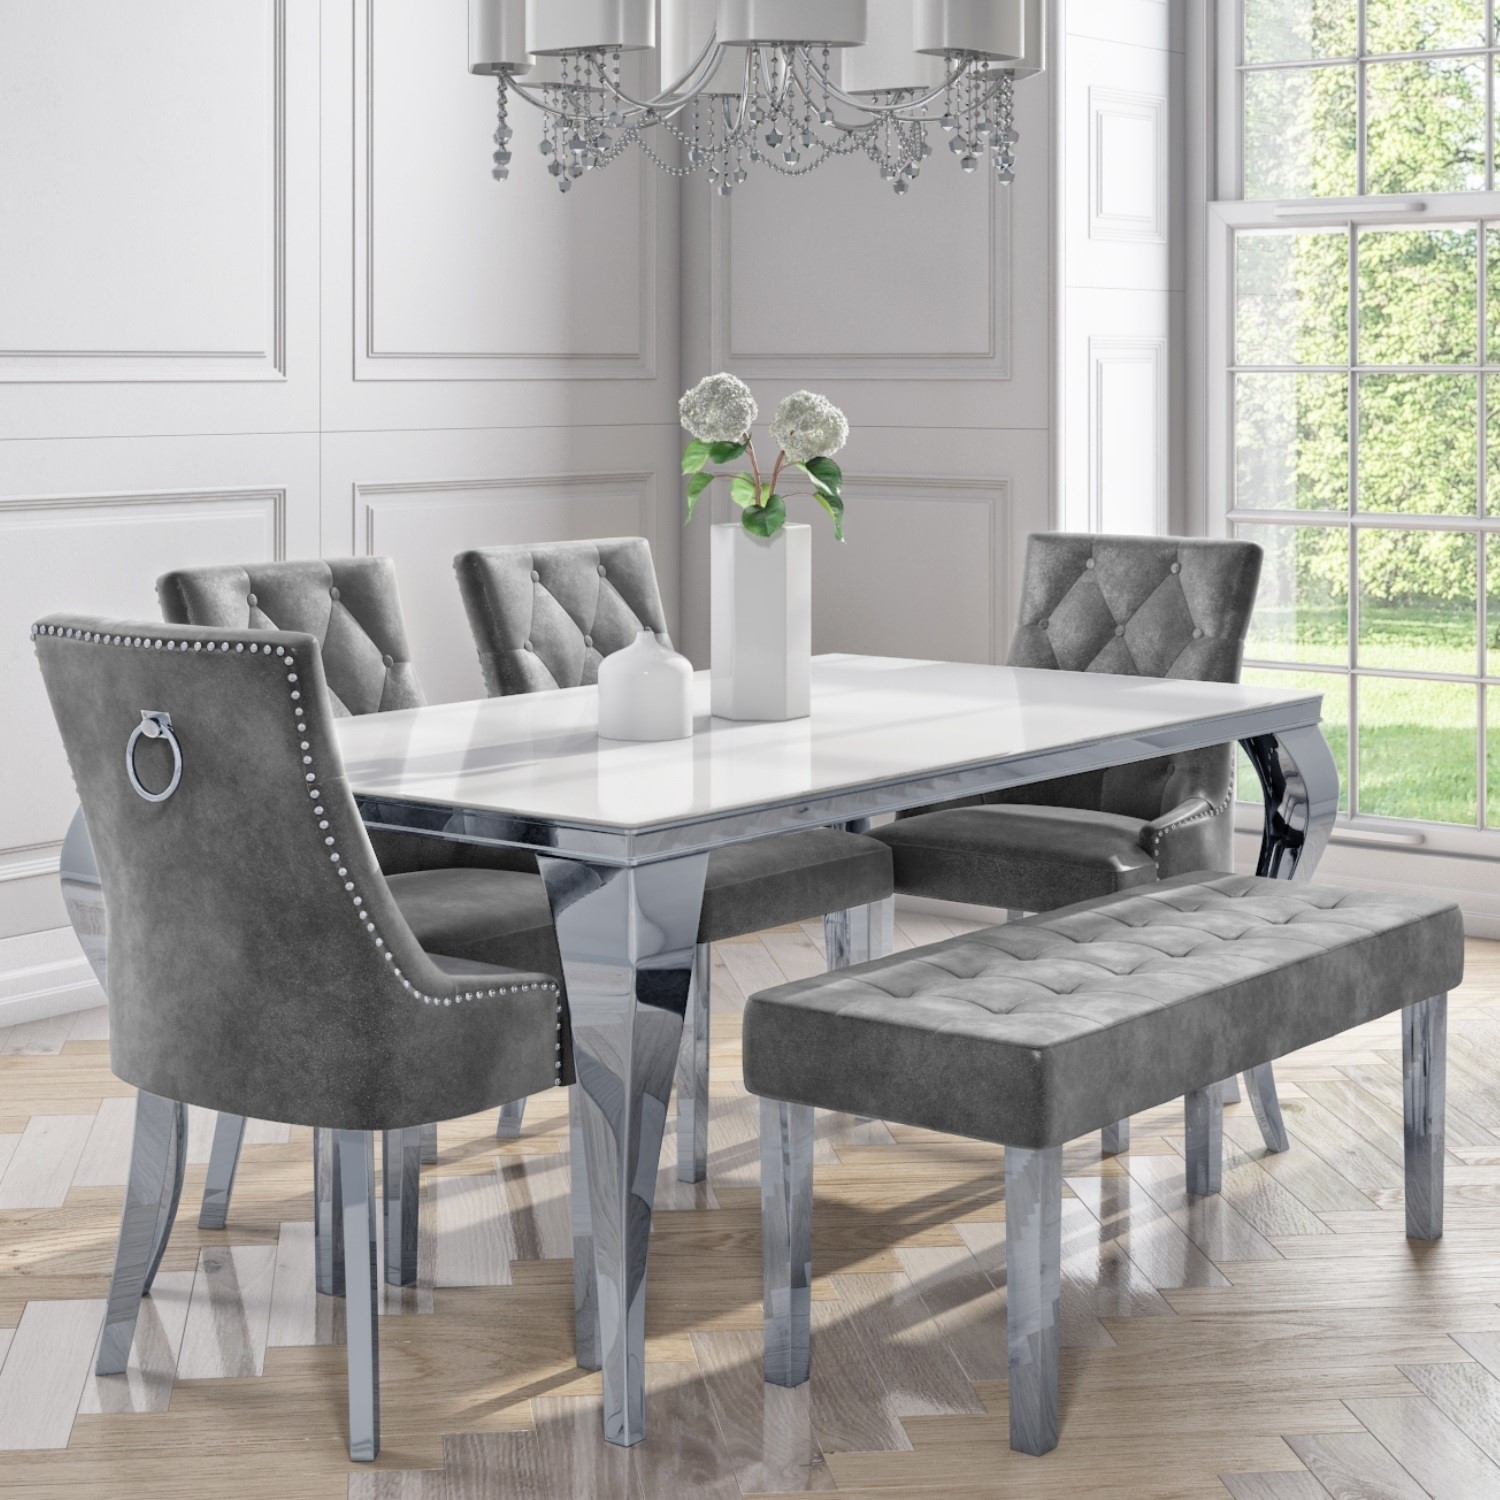 6 seater dining set with white table 4 grey velvet chairs and 1 bench   jade boutique